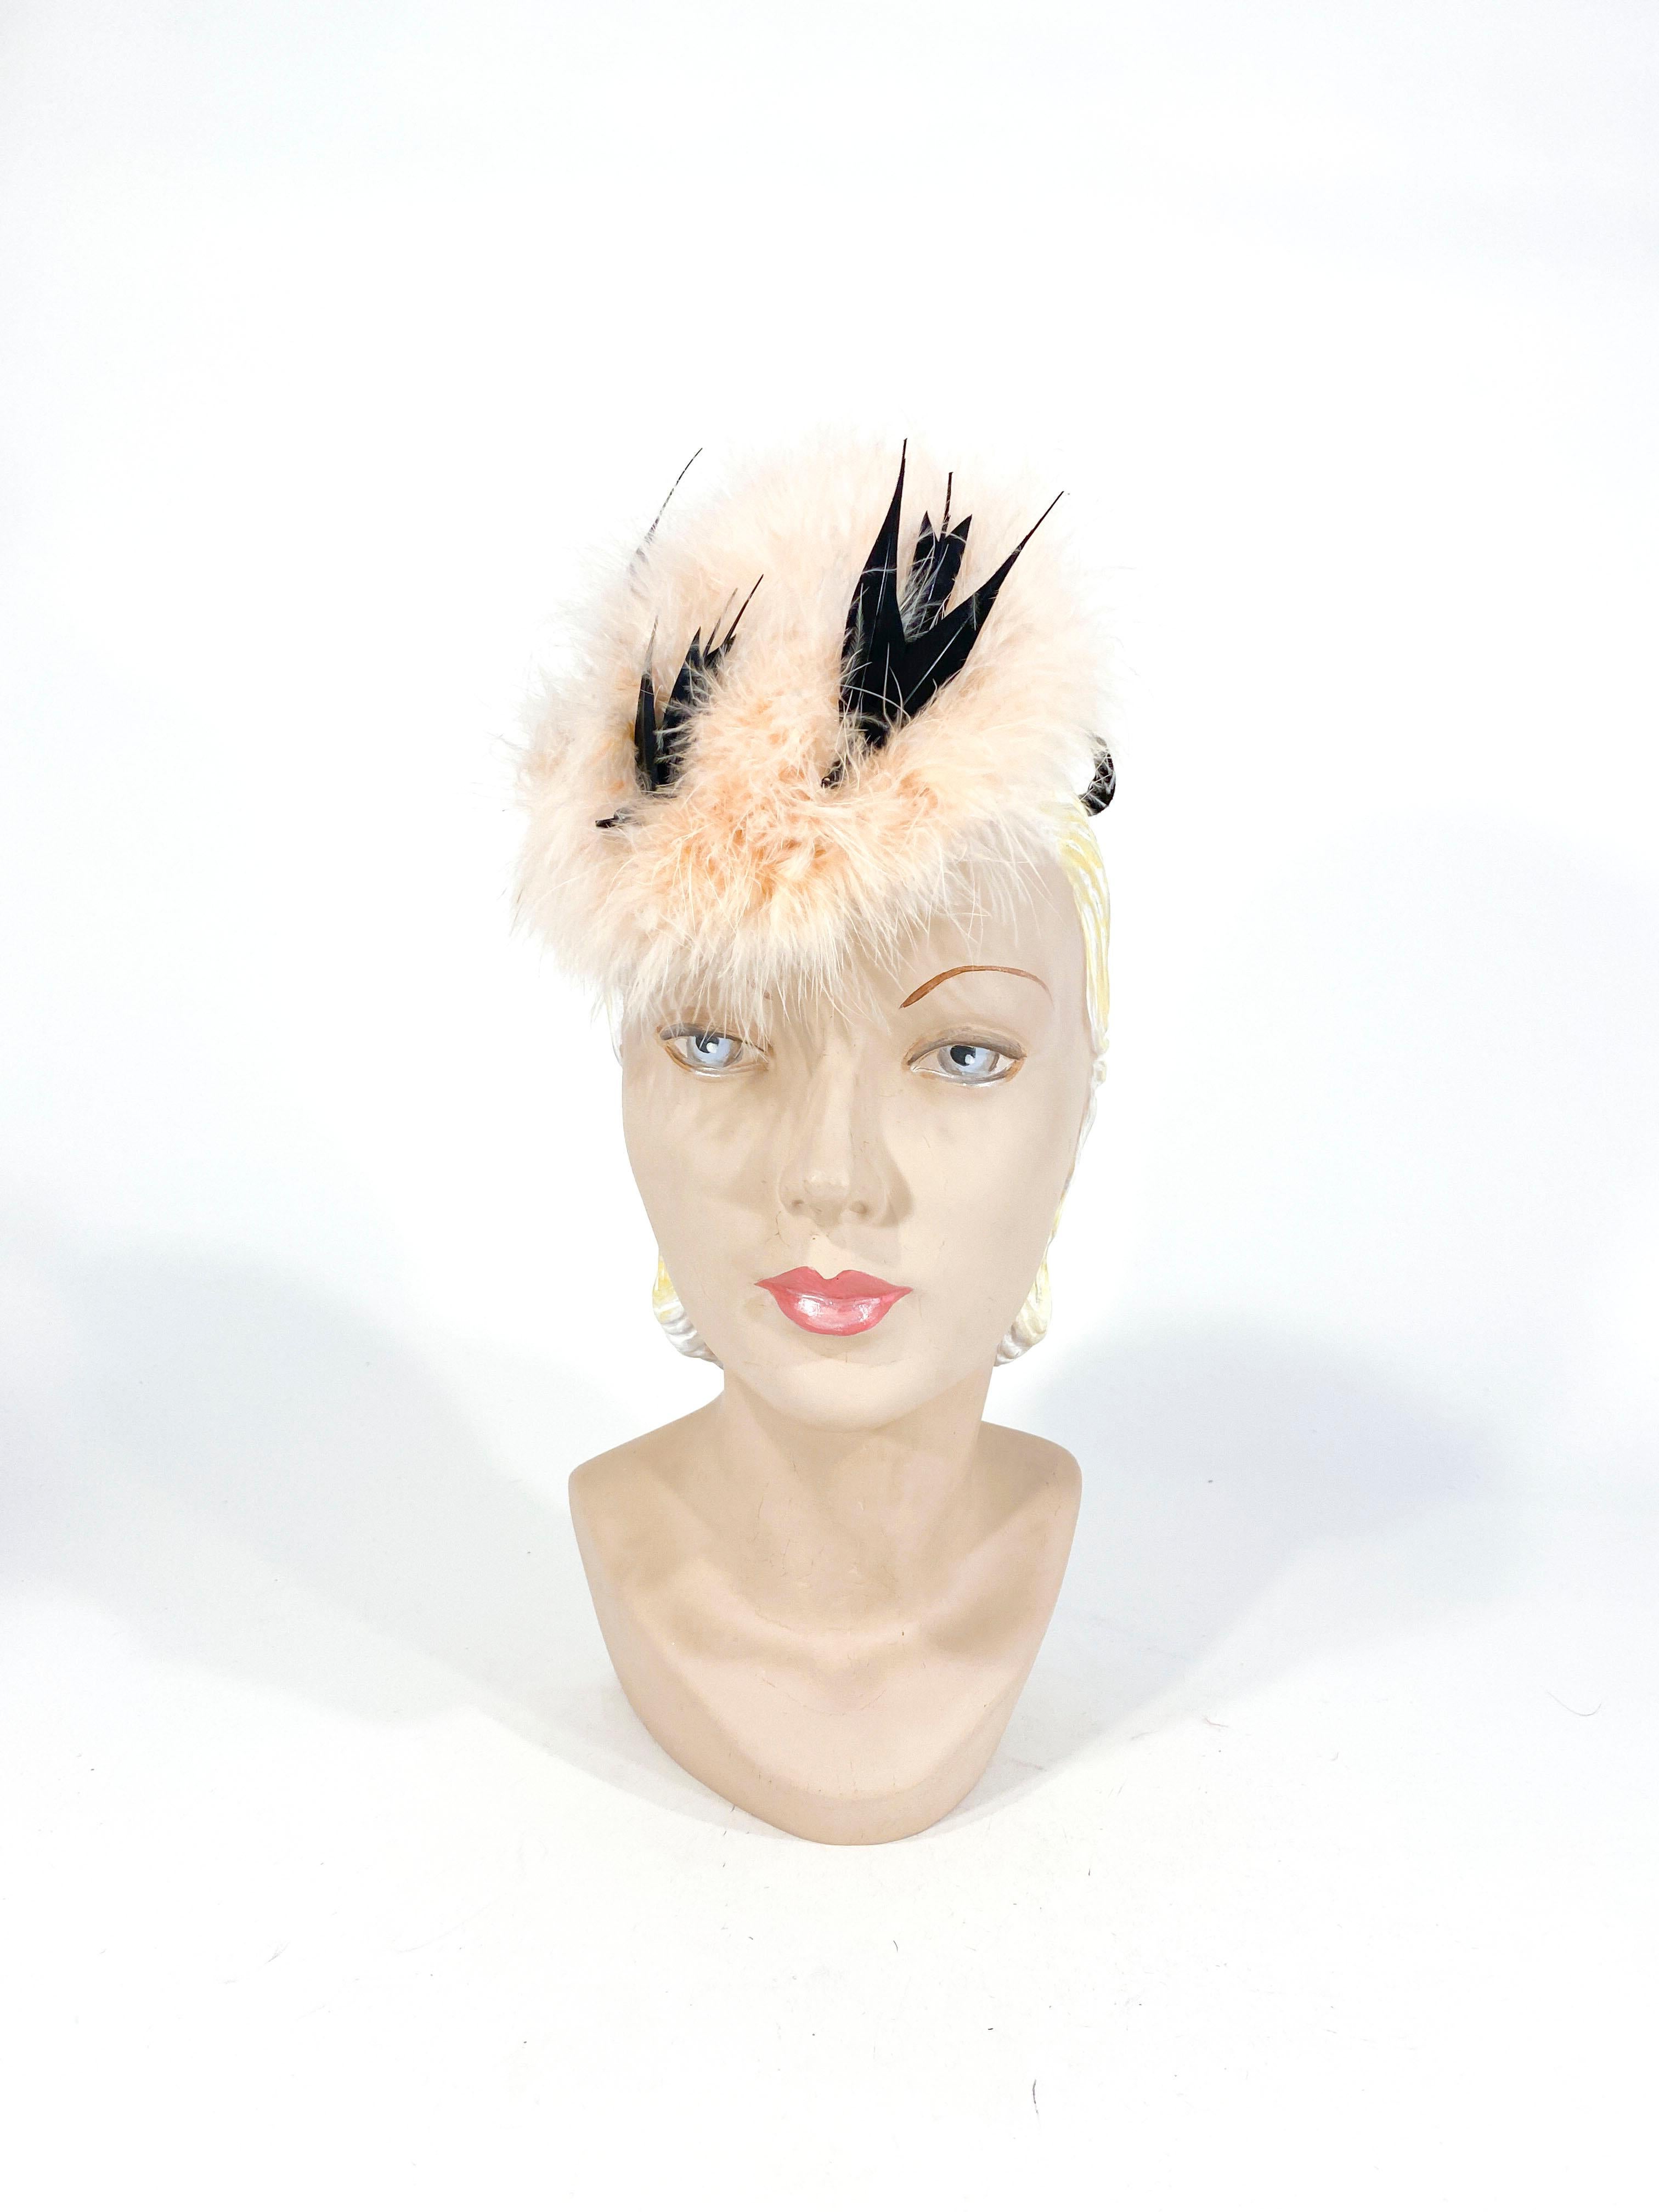 Early 1940s perch cocktail hat decorated with a nest of pink marabou feathers nesting three hand sculpted black birds. The hat is lined in a pink satin and the security ring covered in black wool felt fixes the hat to the head. 